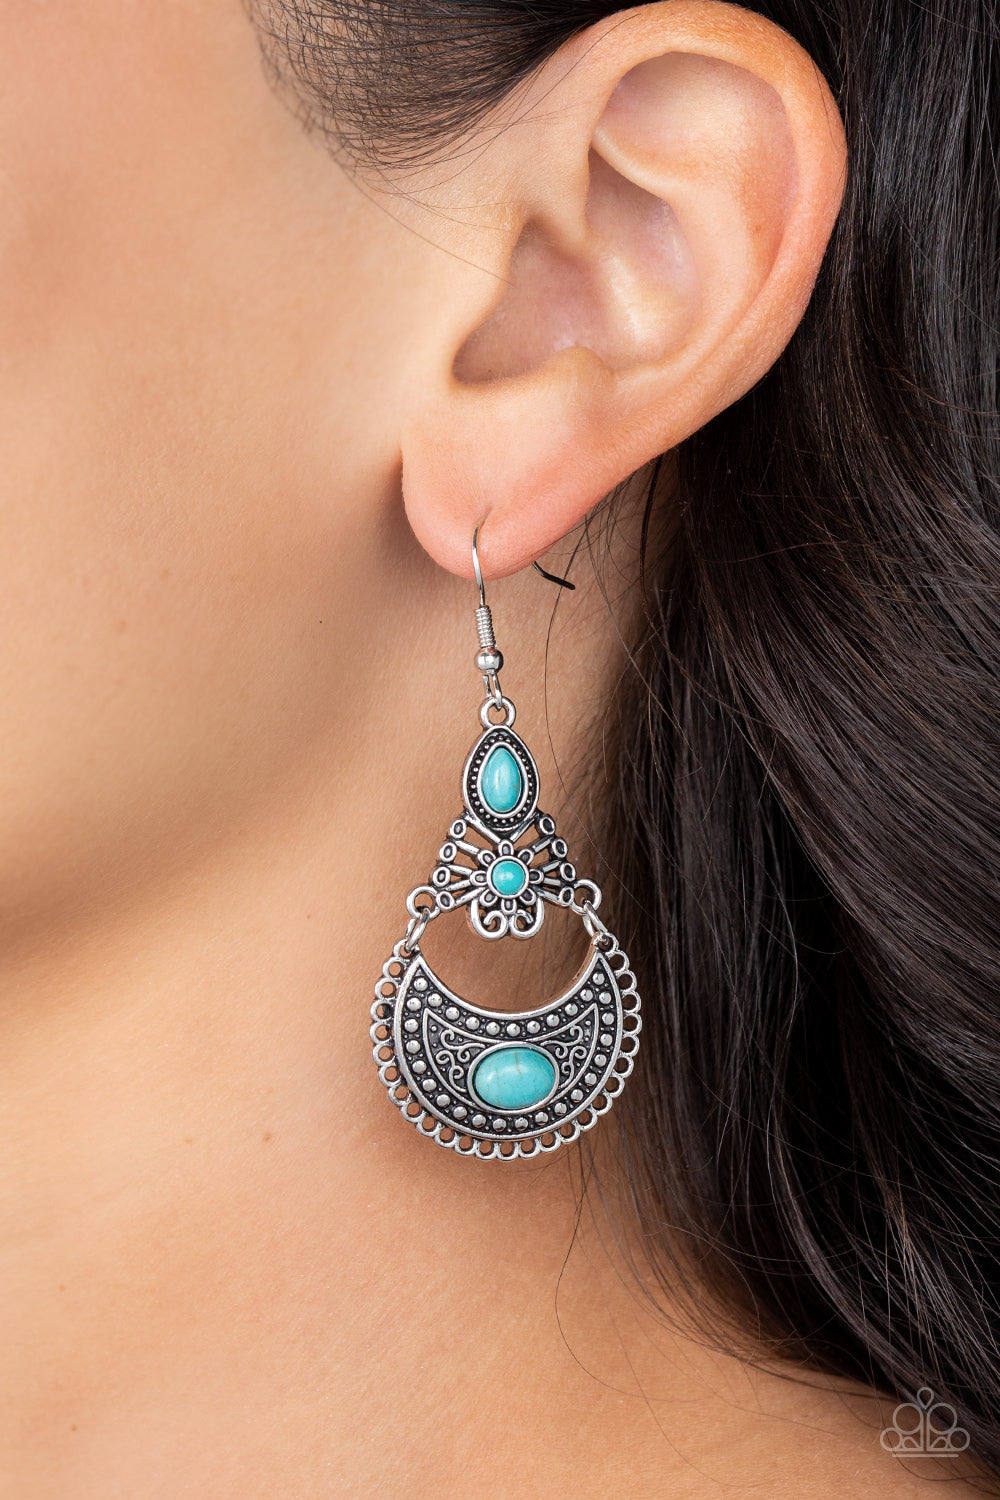 Sahara Samba - Blue Turquoise and Silver Earrings - Paparazzi Accessories - A dainty collection of teardrop, round and oval turquoise stones adorns the front of a decorative lure. Filled with frilly filigree and rustic silver studs, the mismatched frames delicately link into an artisan inspired centerpiece. 